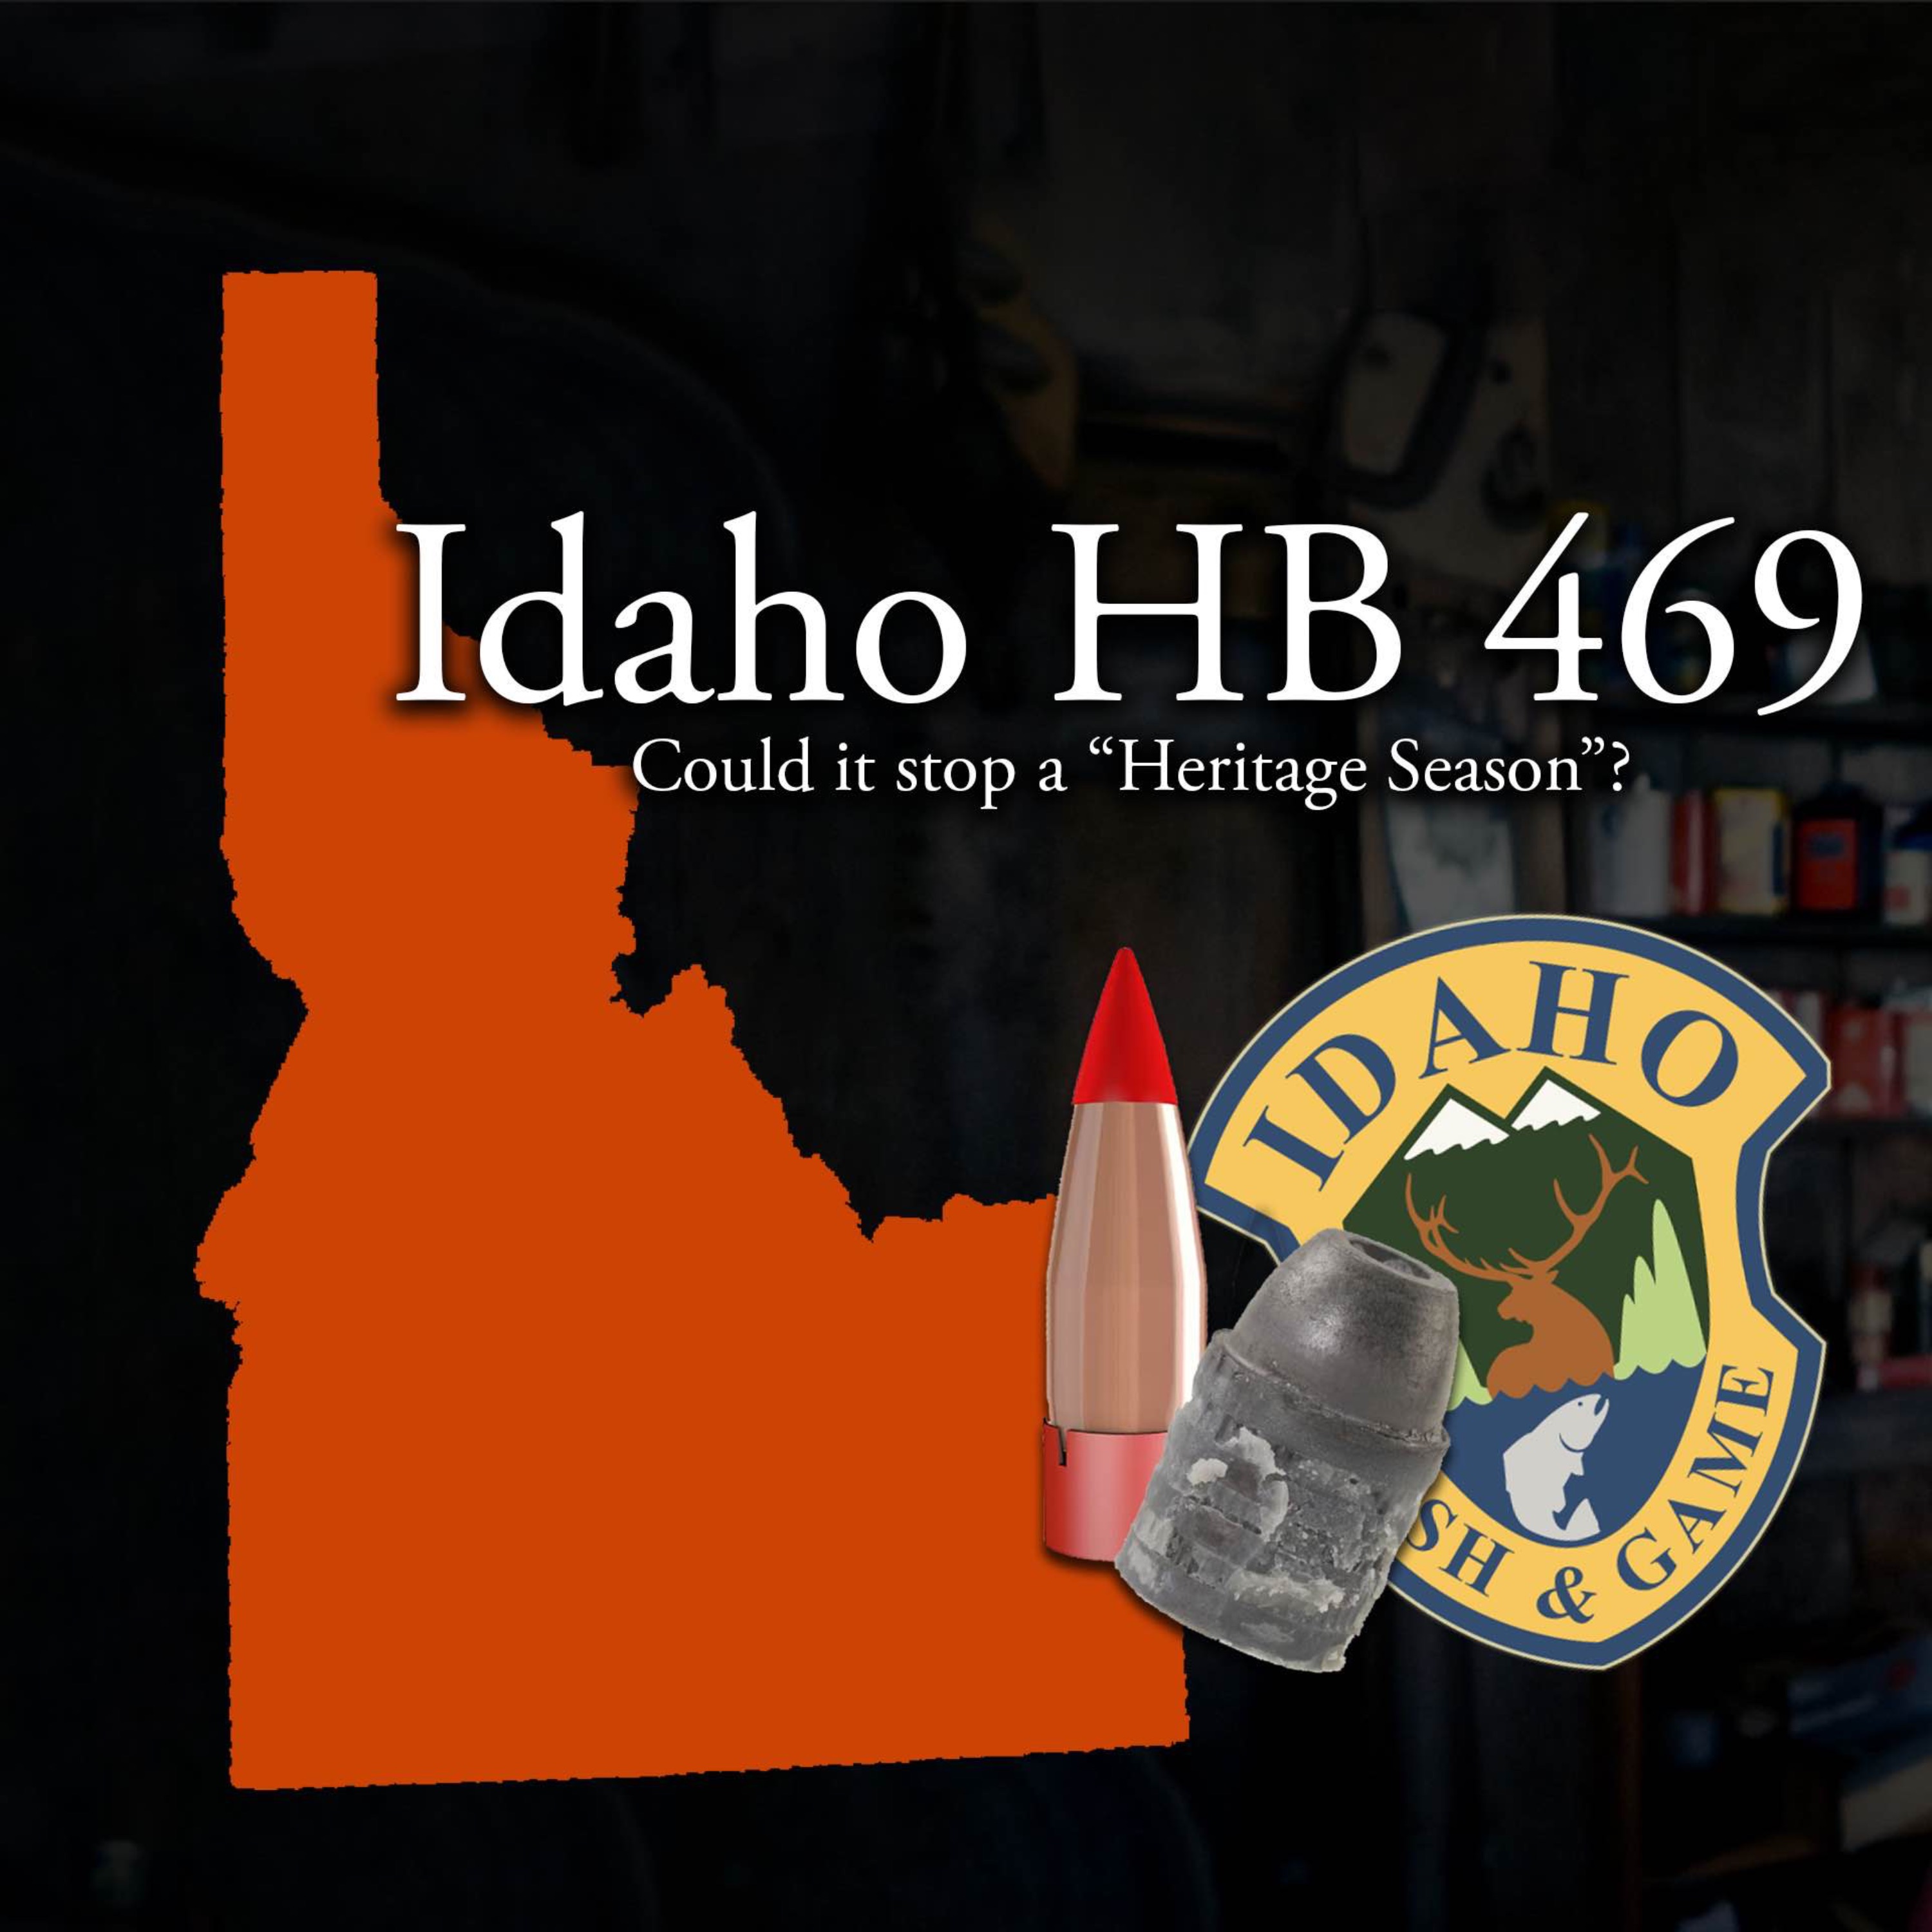 Idaho HB 469 - More Proposed Changes to Open up the Season, this time from the Legislature